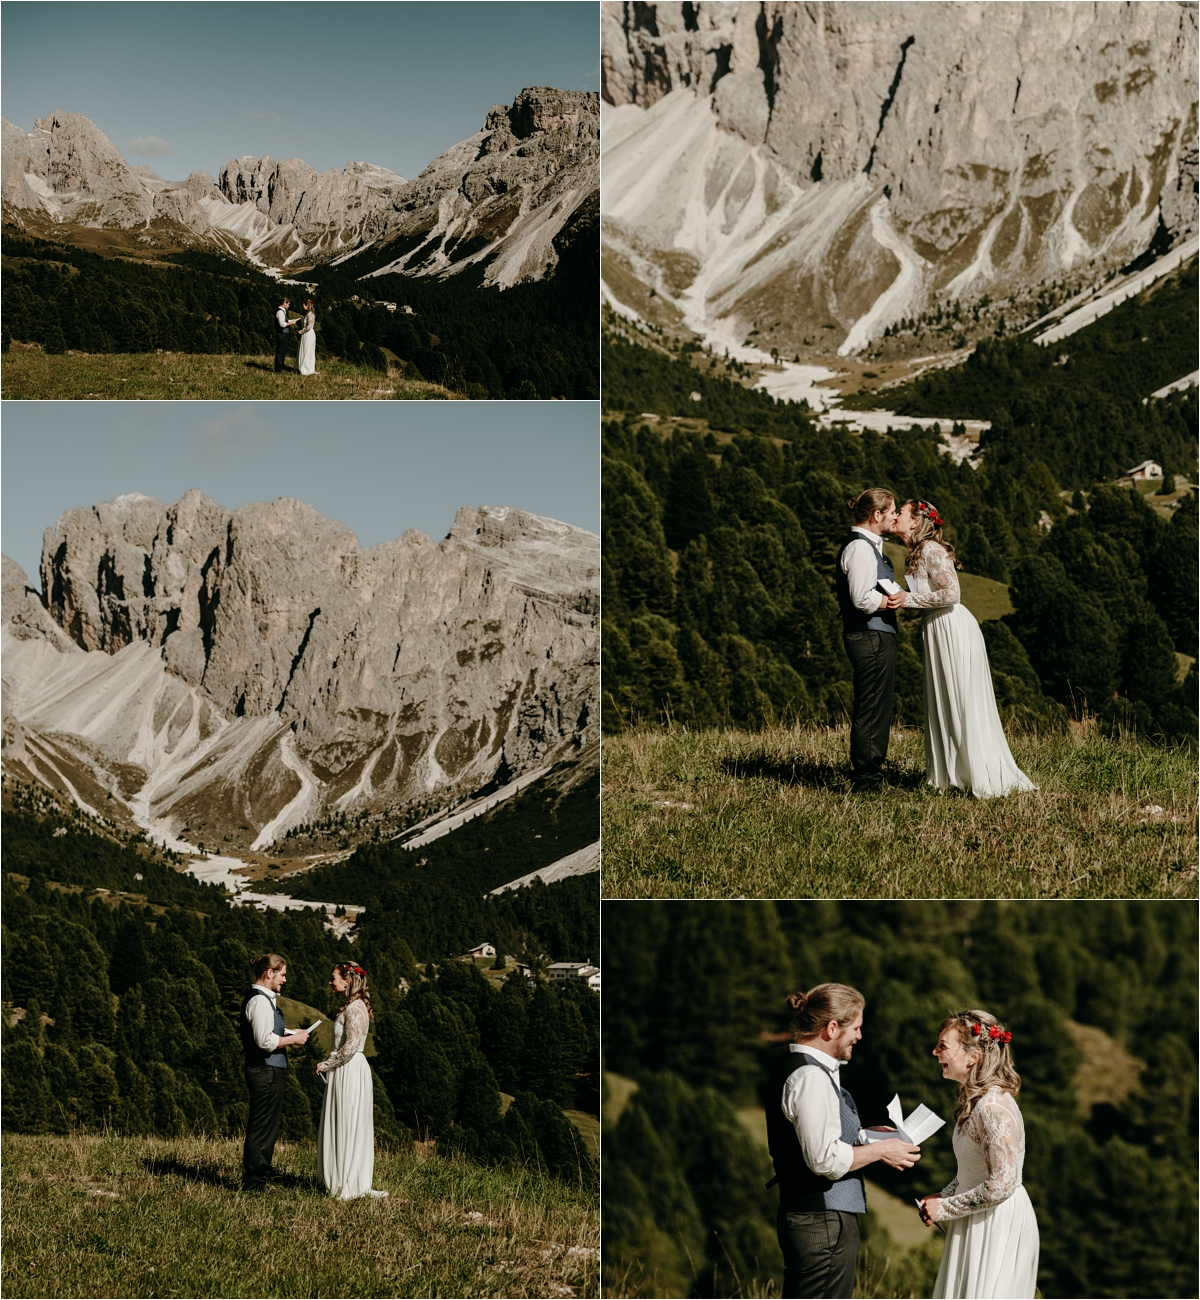 An elopement ceremony near Seceda in the Dolomites. Photos by Wild Connections Photography